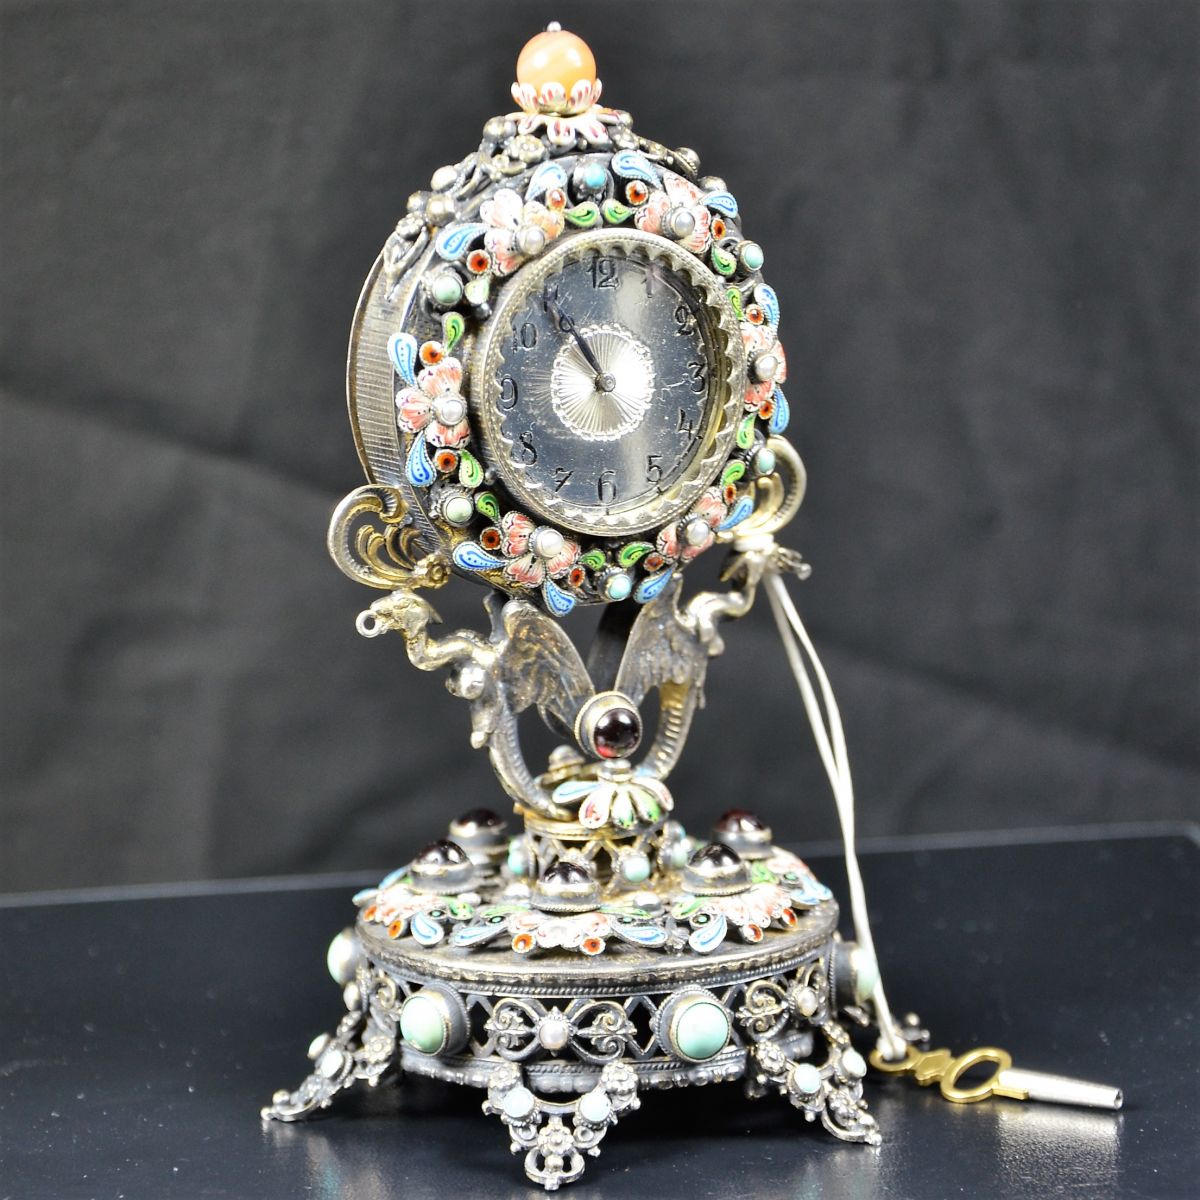  Pocket watch in gilded silver. Enamel, pearls, turquoise and garnet. Oestereic work. Good condition....